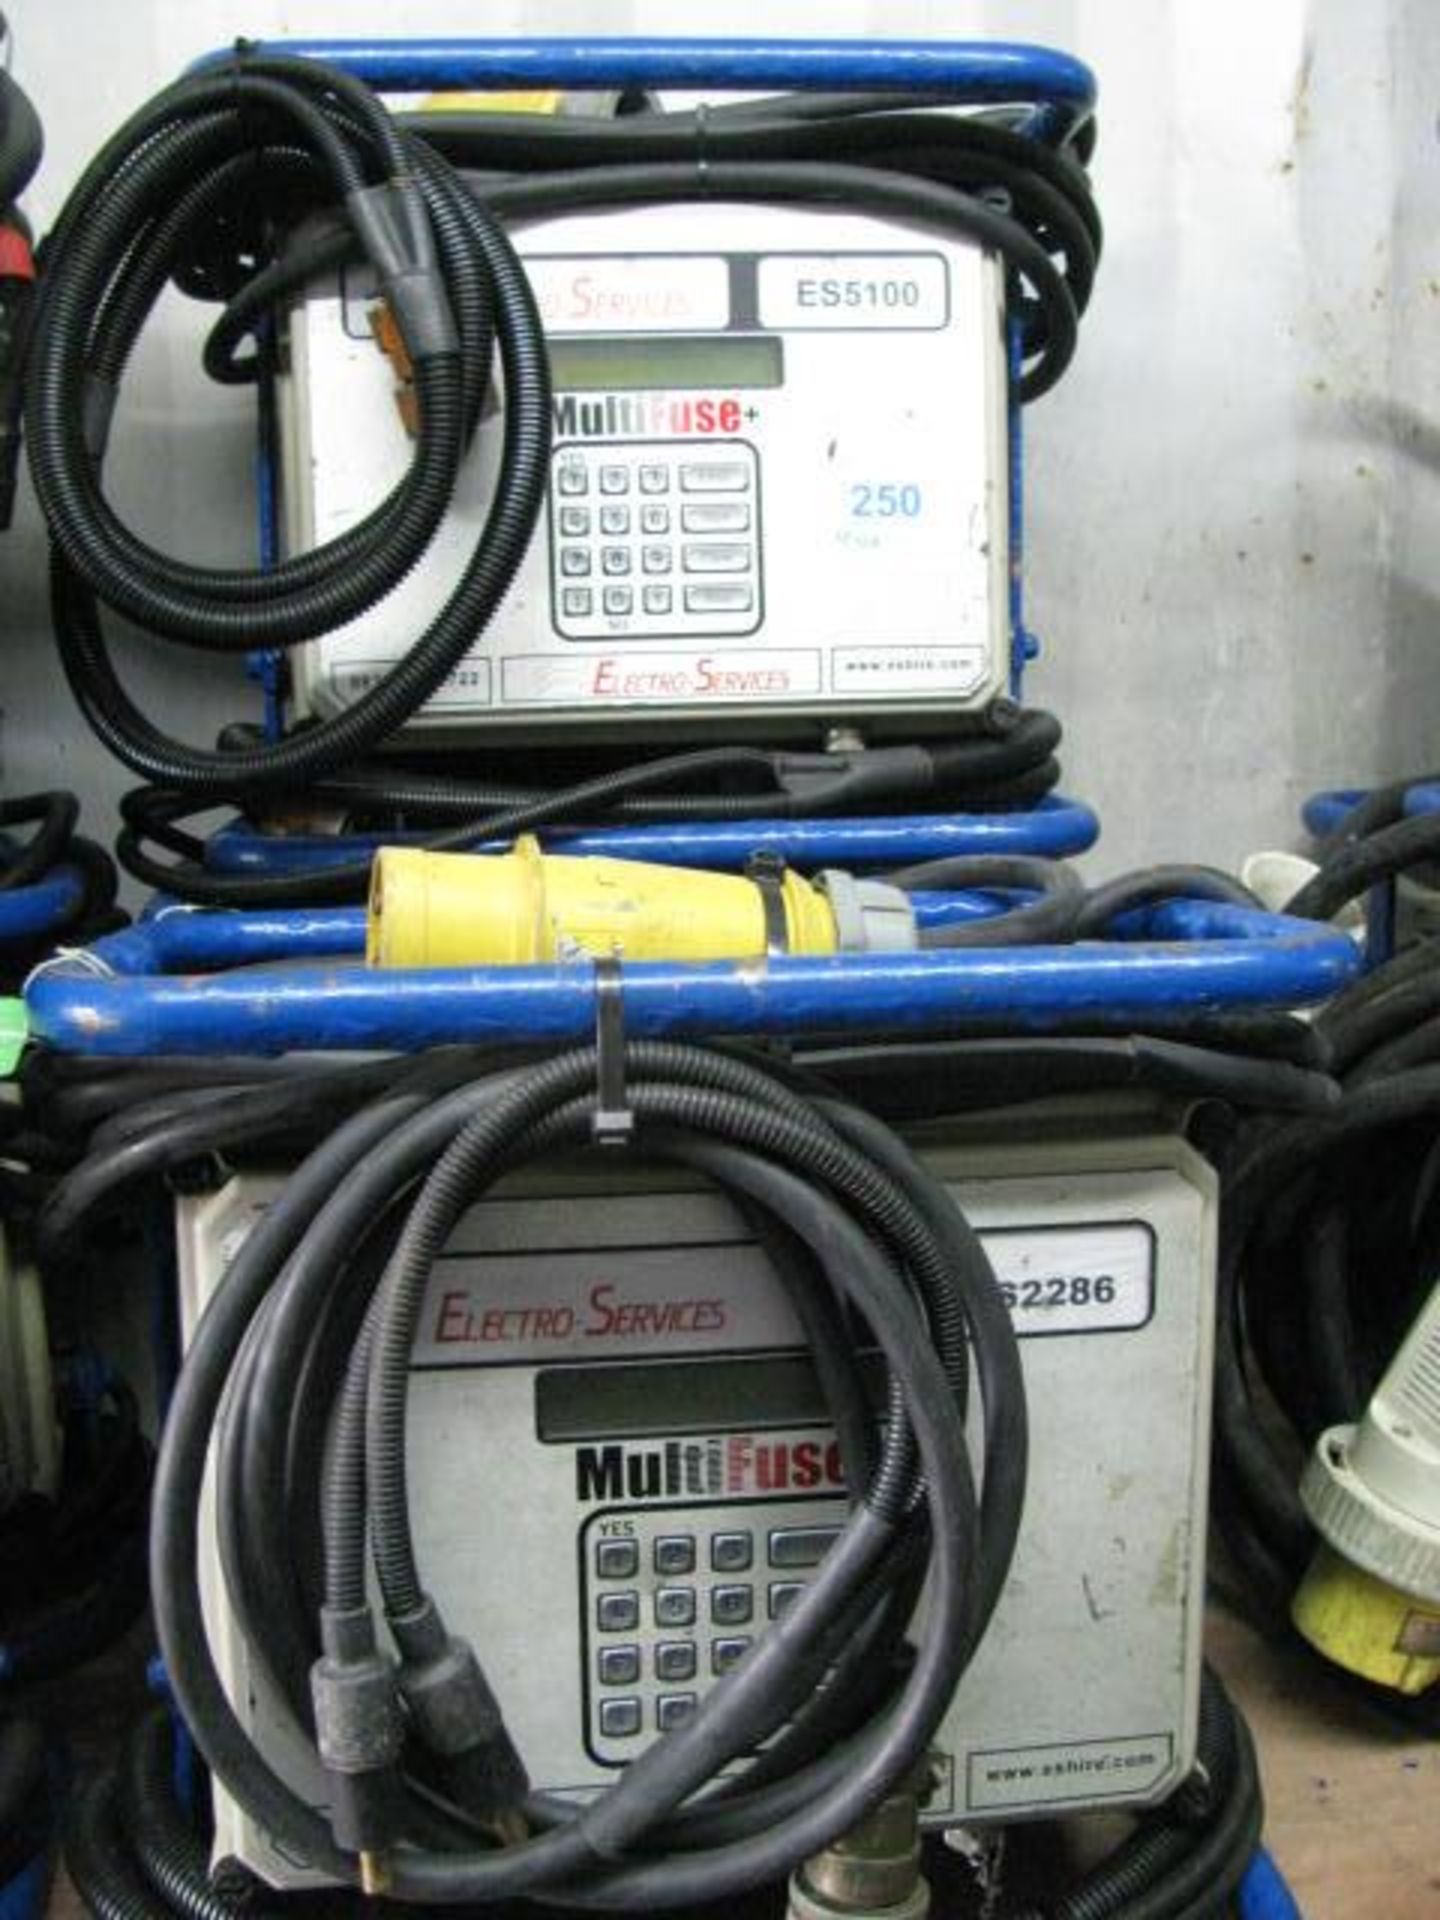 (3) Electro Service multi fuse and data logger/analysers